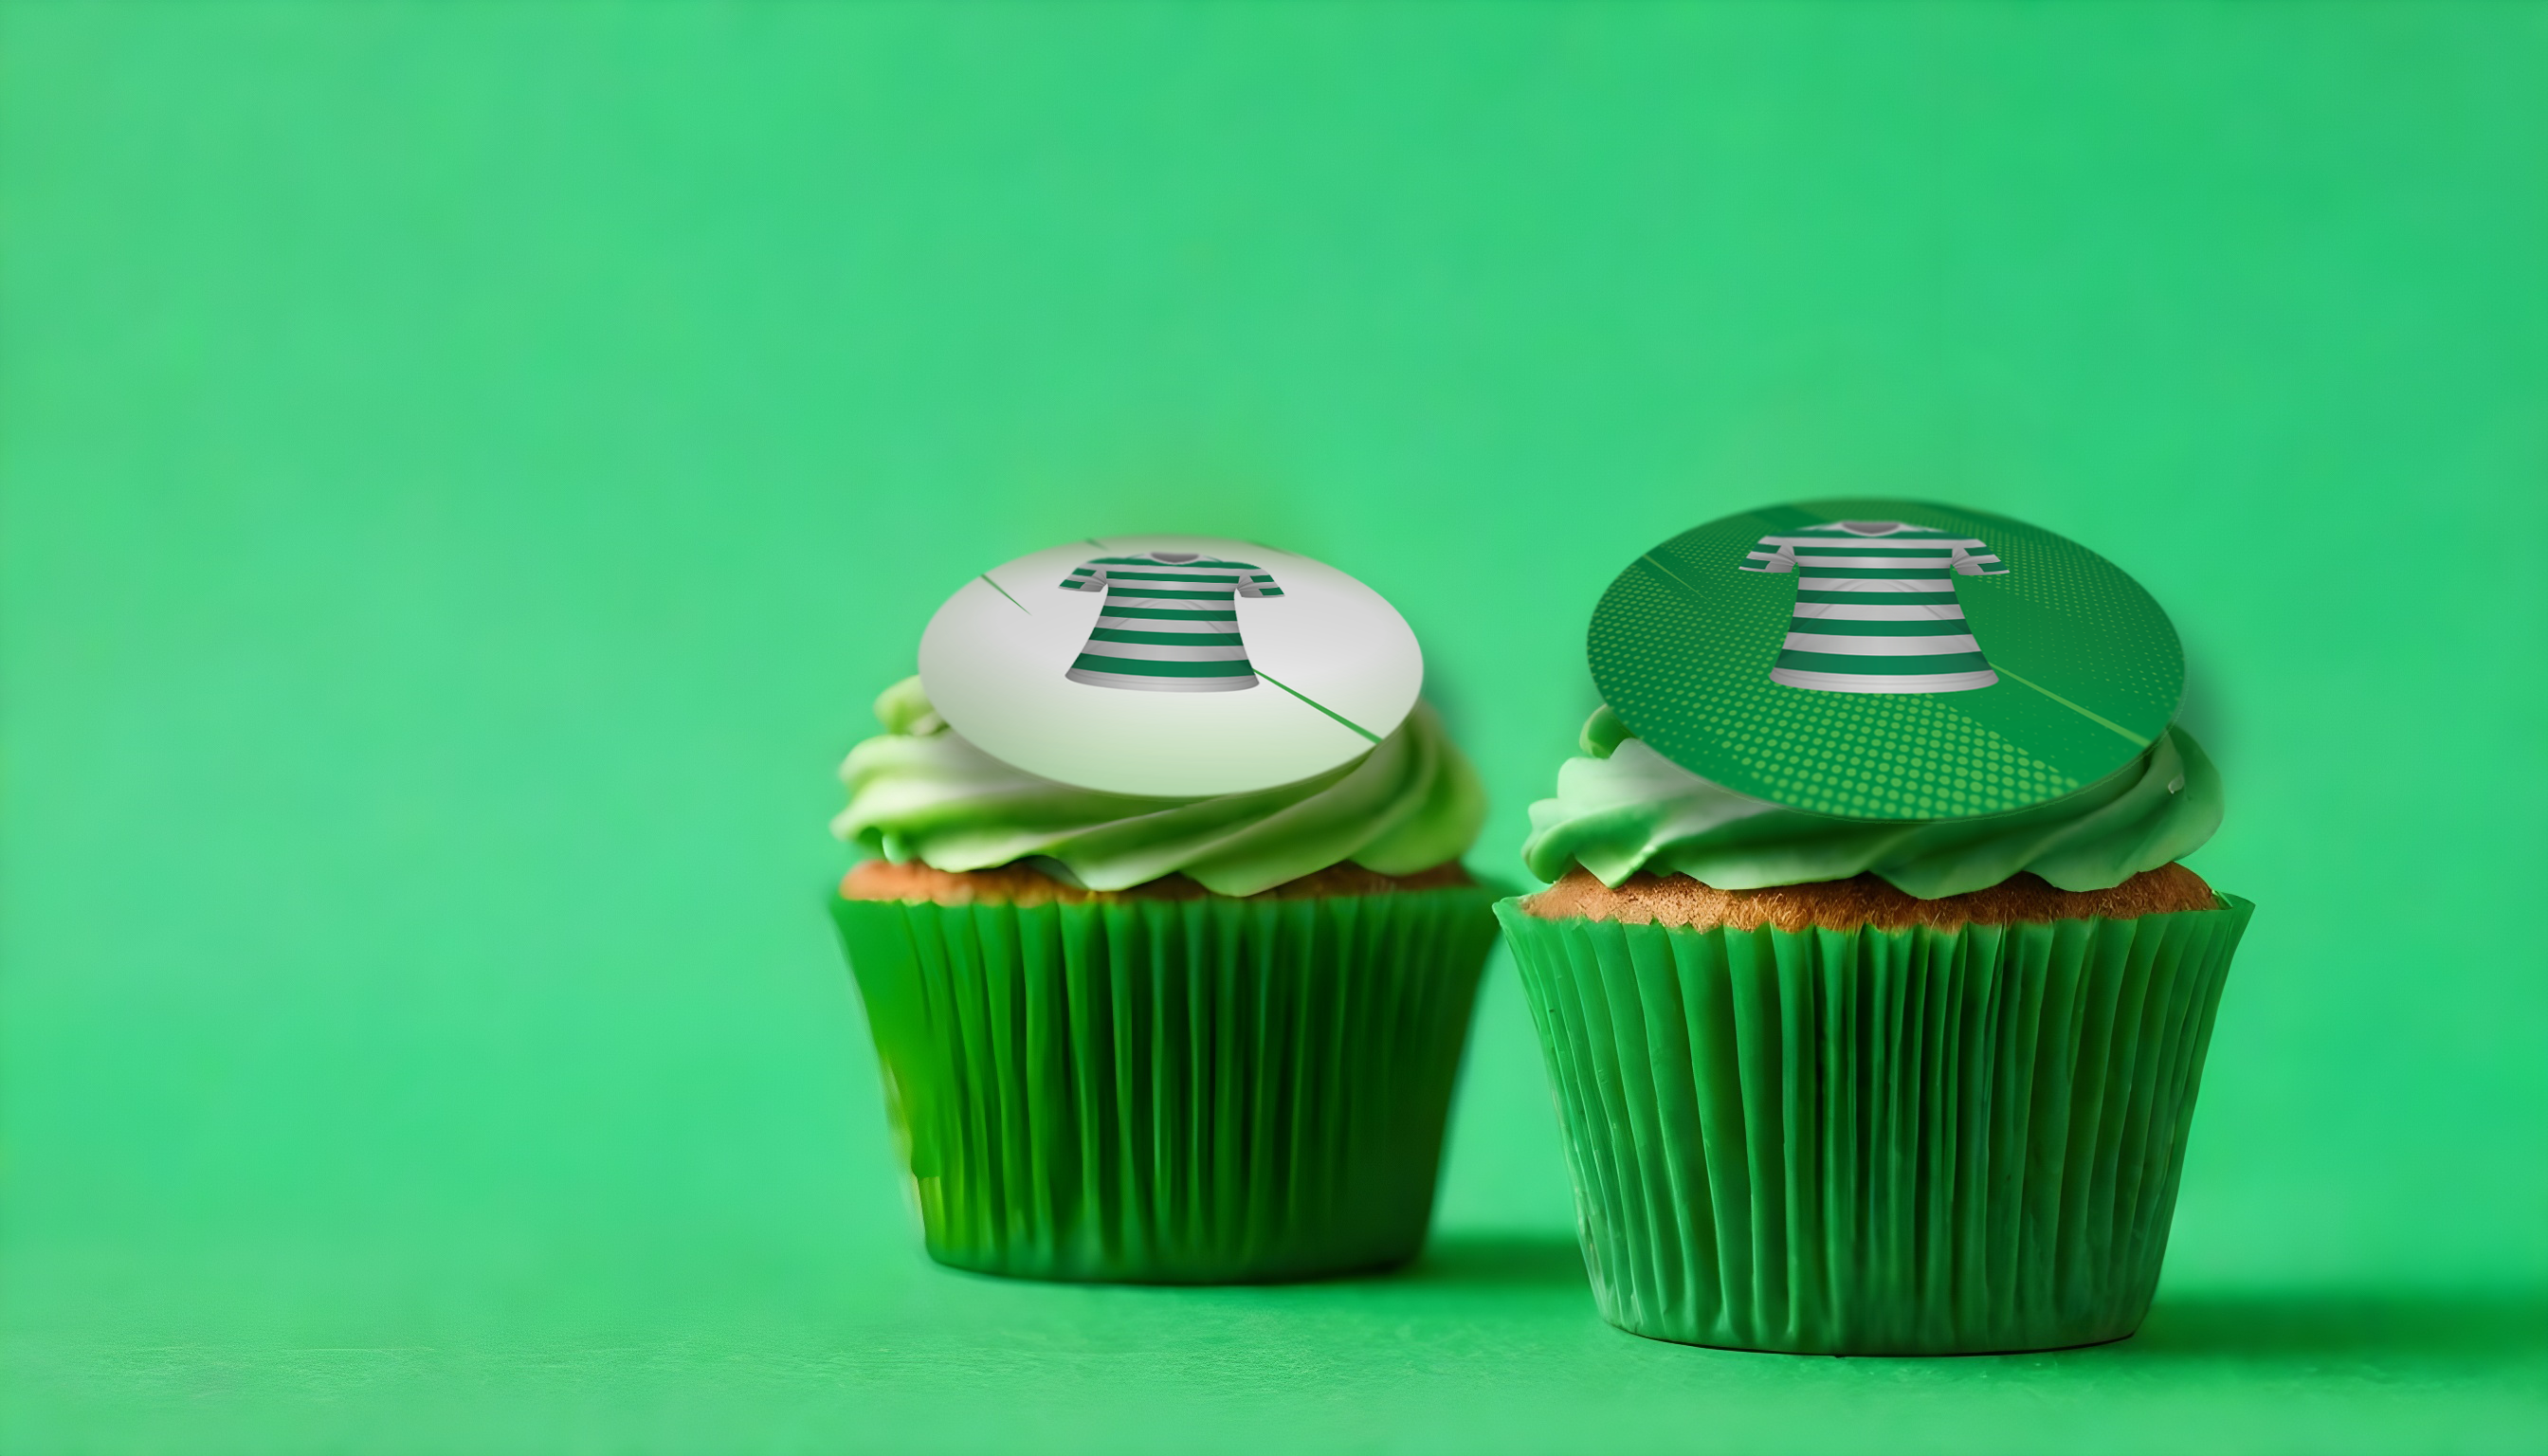 Celtic cupcakes with celtic FC style football shirts